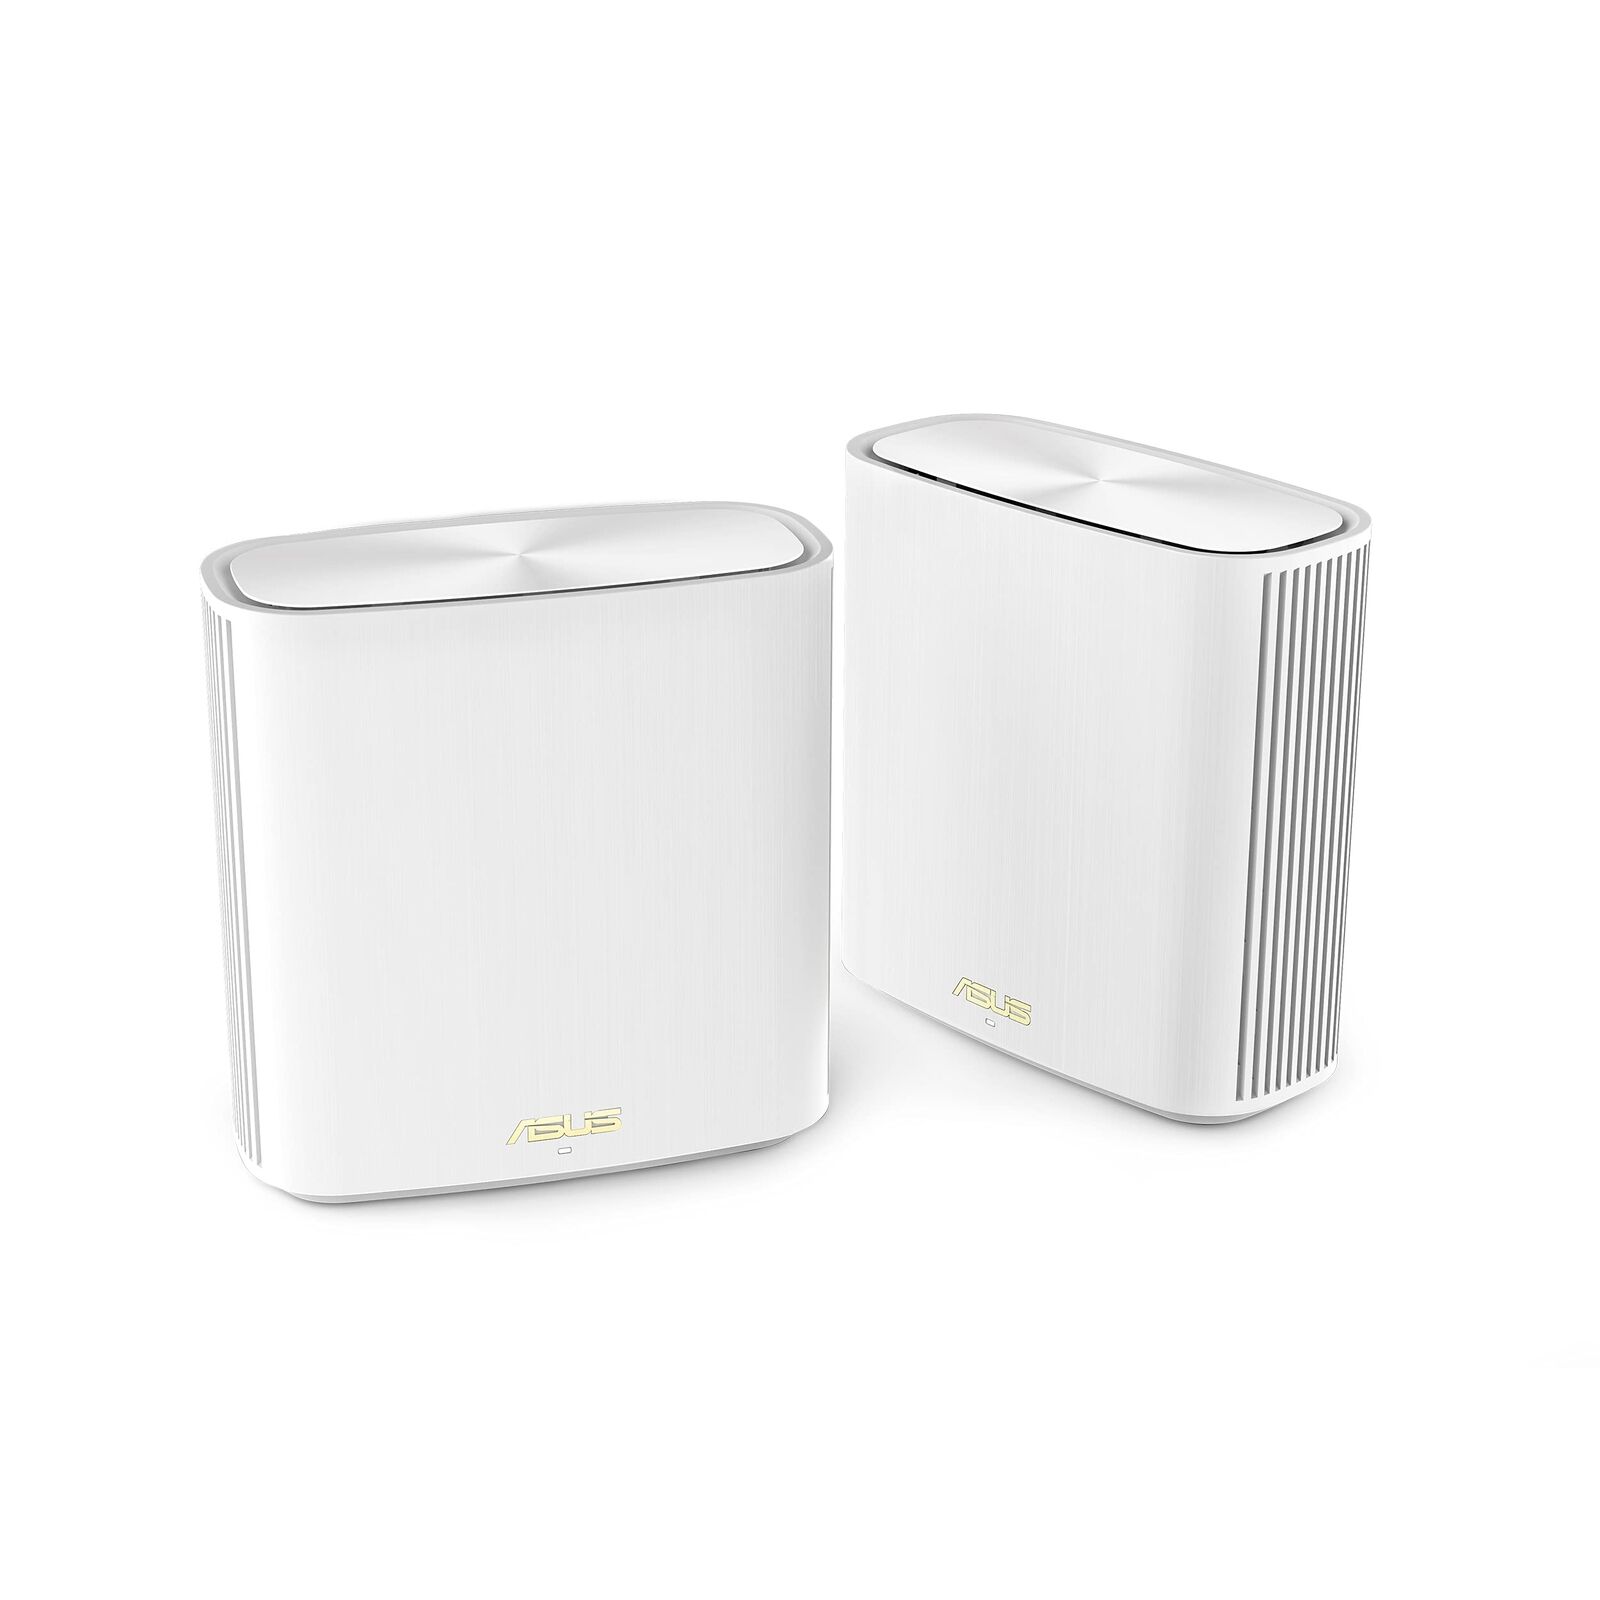 ASUS ZenWiFi XD6S Whole Home Mesh WiFi 6 System AX5400 (2 Pack White) Coverage u